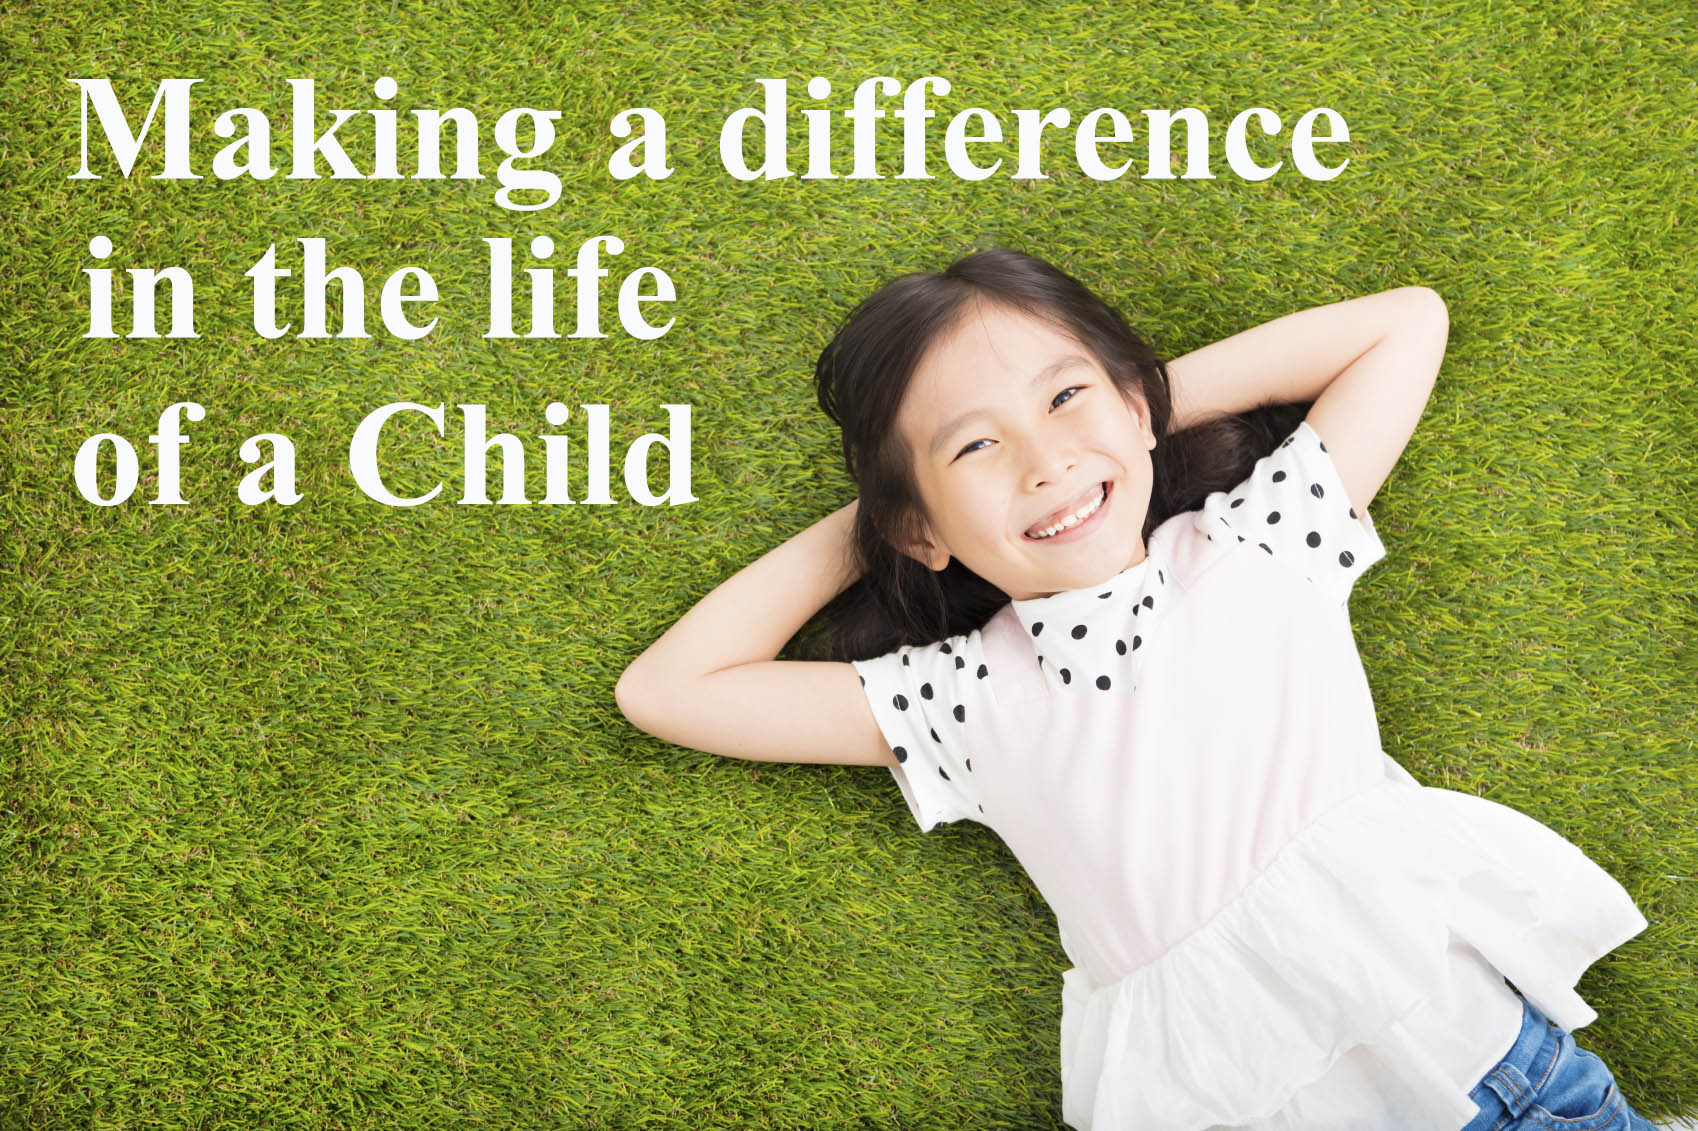 Making a difference in the life of a child